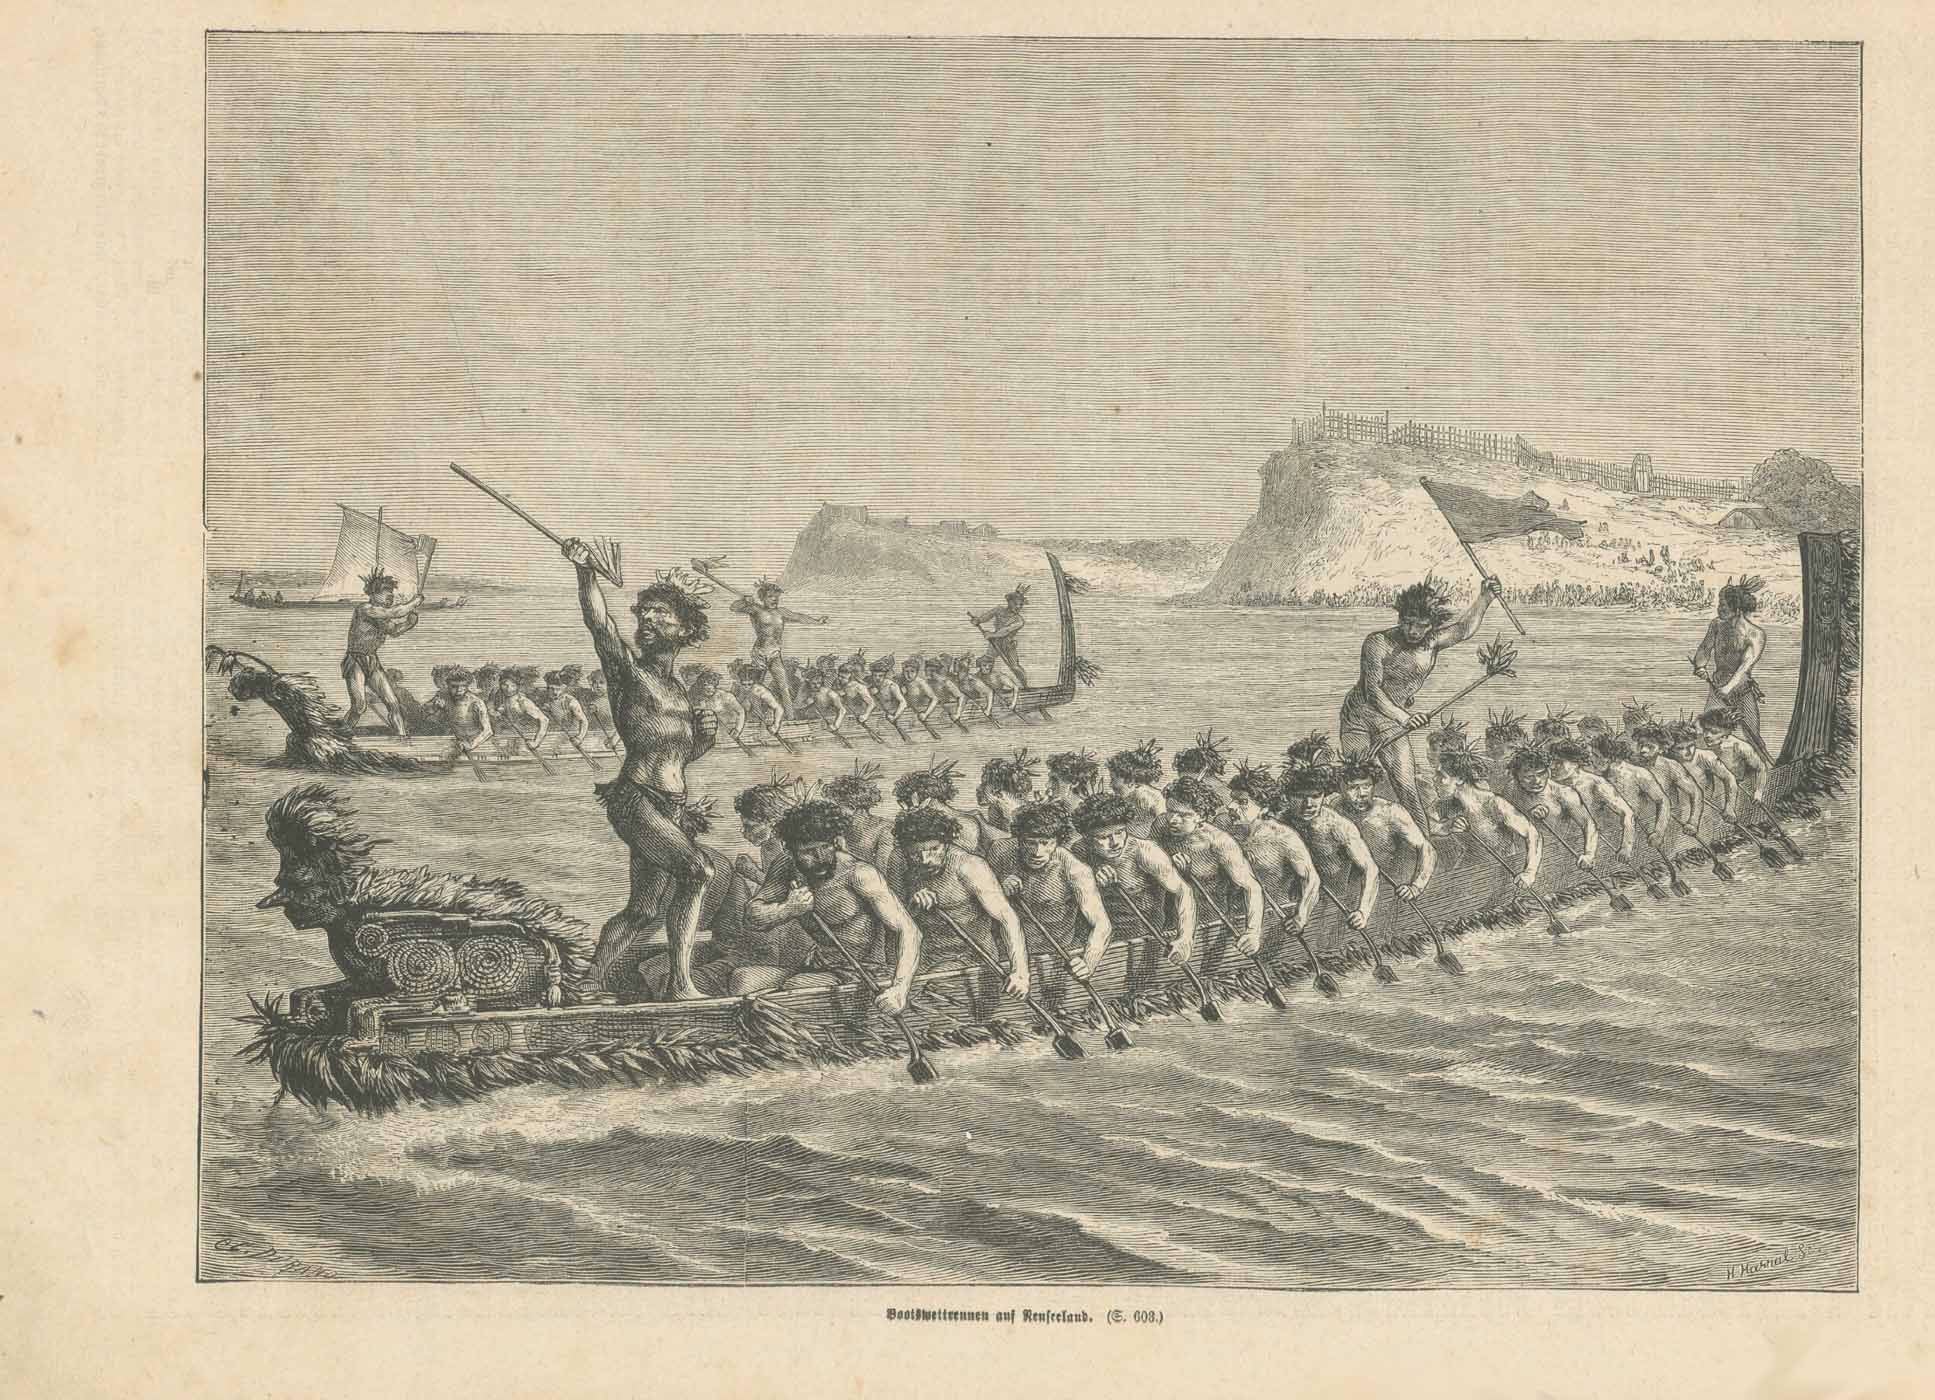 Original antique print  Sports, New Zealand, Boat race, Maori, H. Harald, C. Durand, "Bootswettrennen auf Neuseeland"  Maori boat races in New Zealand. Astonishing 30 sporty men rowing in each of the boats during a boat race event.  Wood engraving by H. Harald after the drawing by C. Durand. Published in a German periodical 1872.